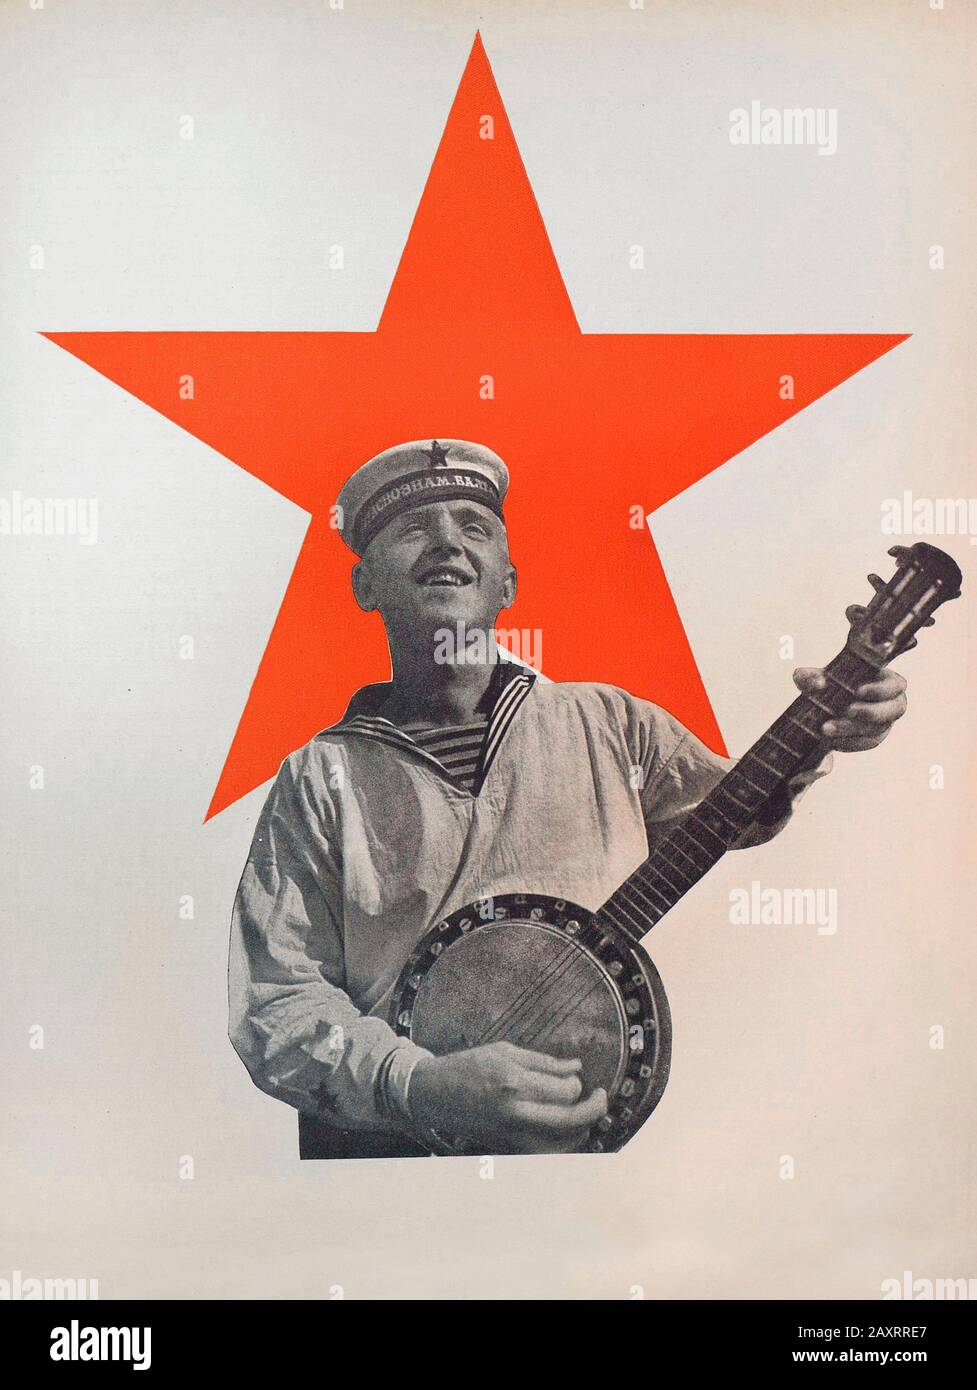 Red Army in 1930s. From soviet propaganda book of 1937. Soviet navy soldier on the red star bachground. Stock Photo